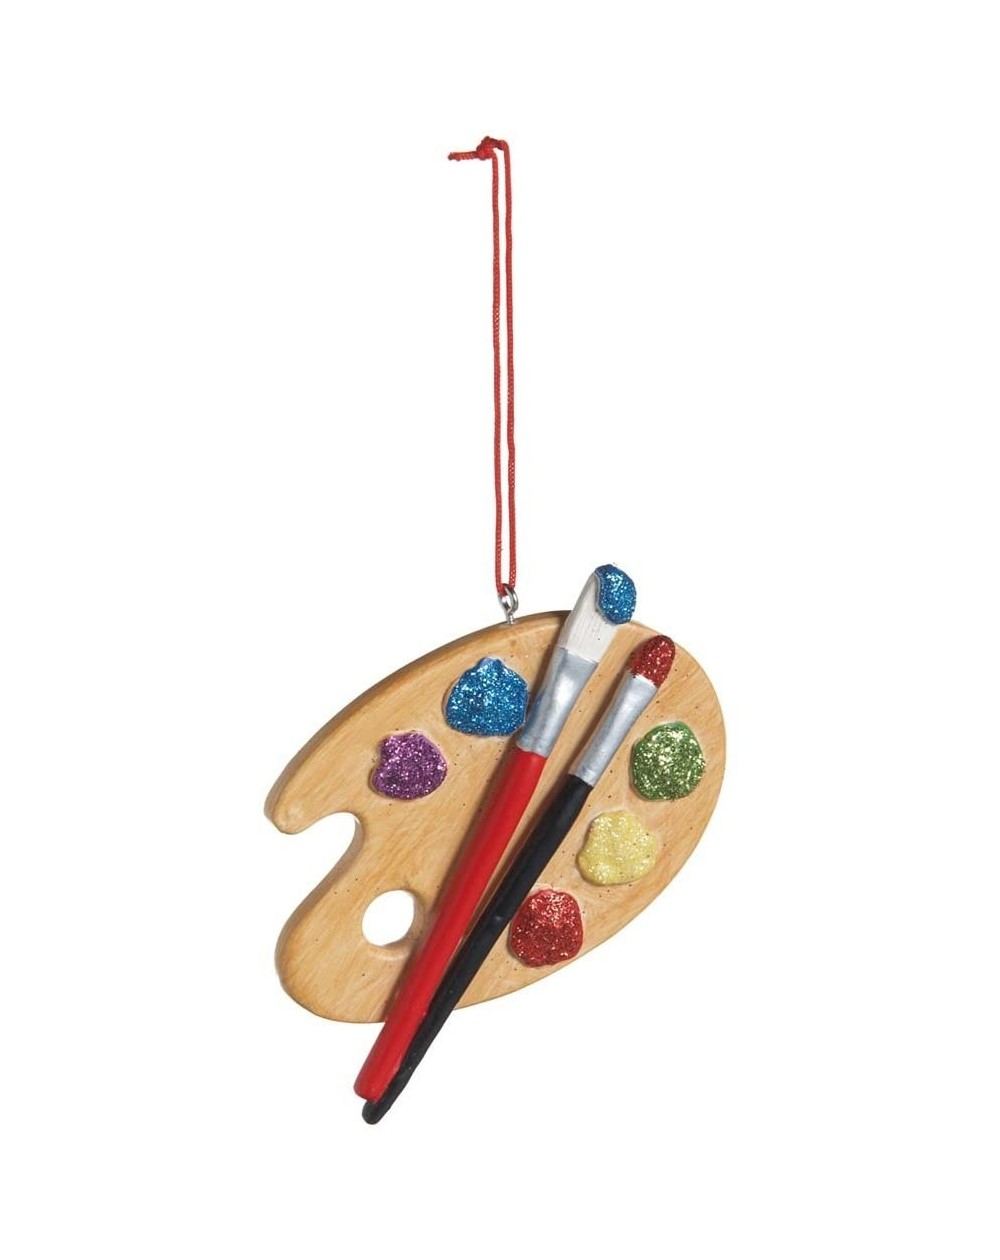 Ornaments Painters Palette Resin Hanging Christmas Ornament - Size 3 in. - CB11LZ67LOD $12.88